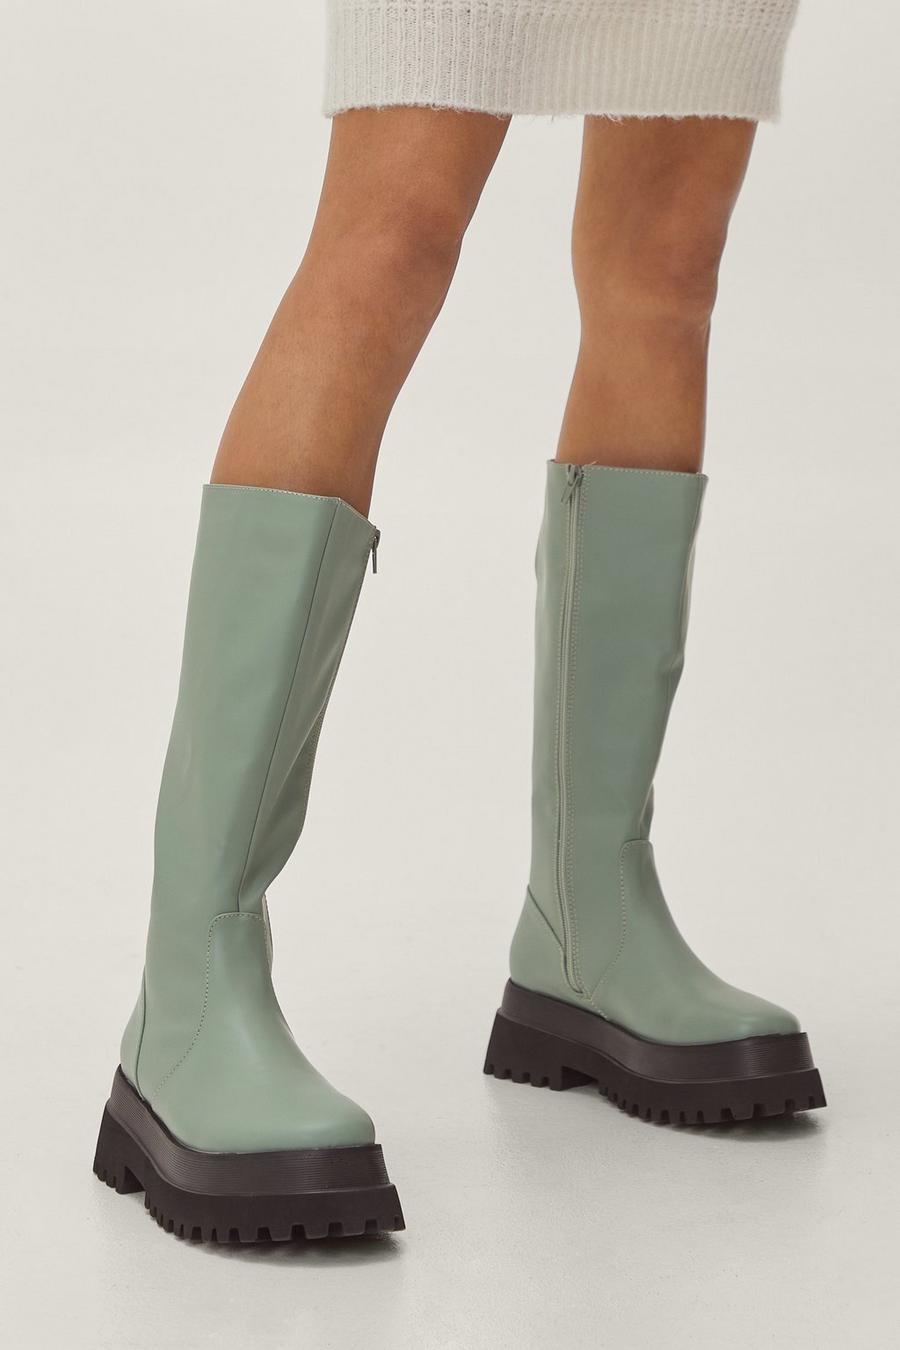 Rubber Knee High Wellie Boots